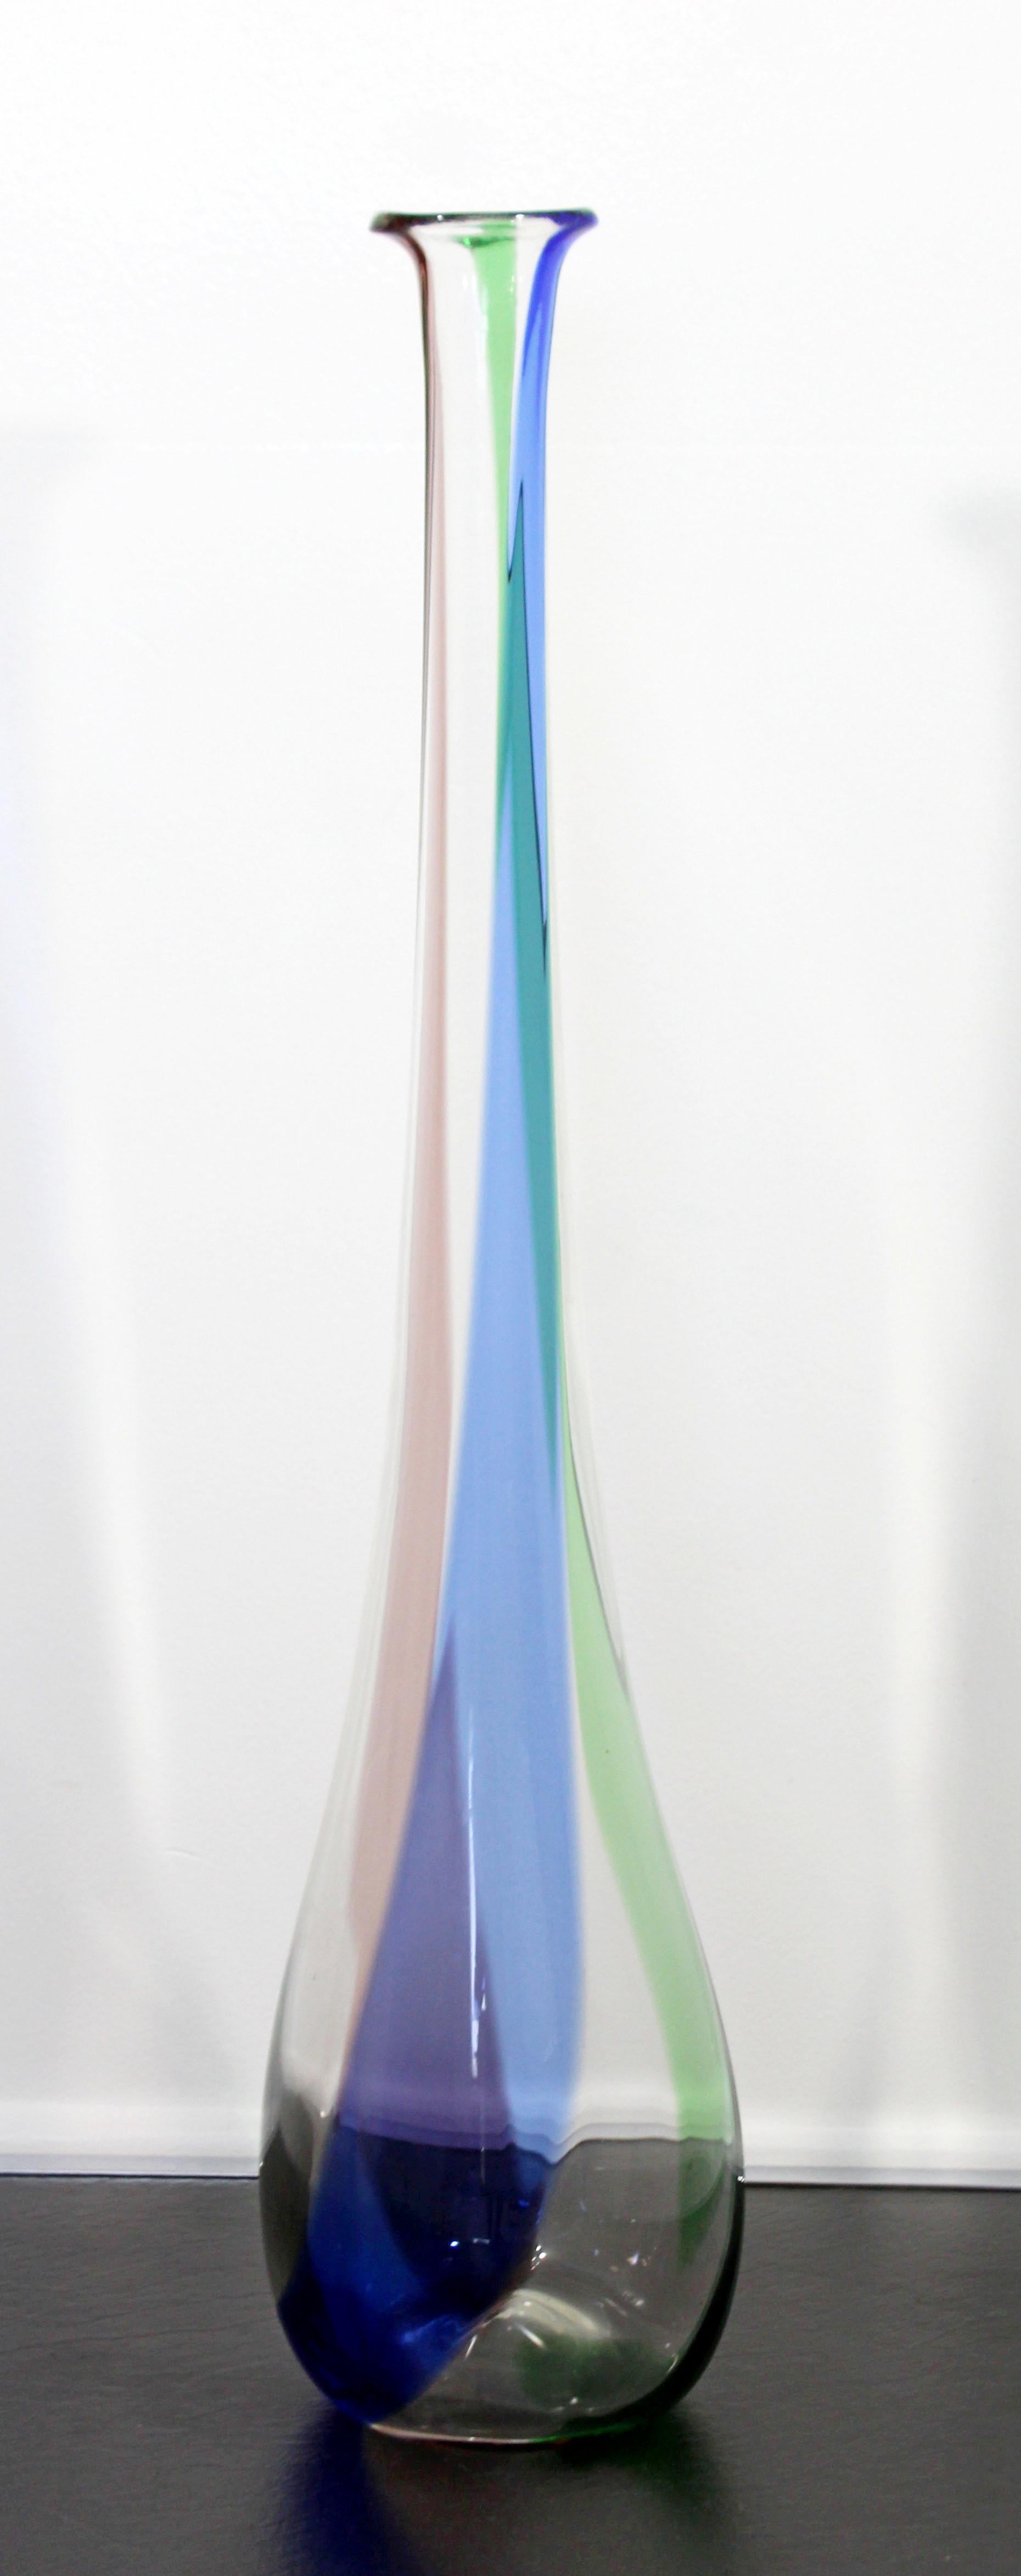 Late 20th Century Mid-Century Modern Tall Tri Colored Murano Glass Art Vase 1970s Italy Green Blue